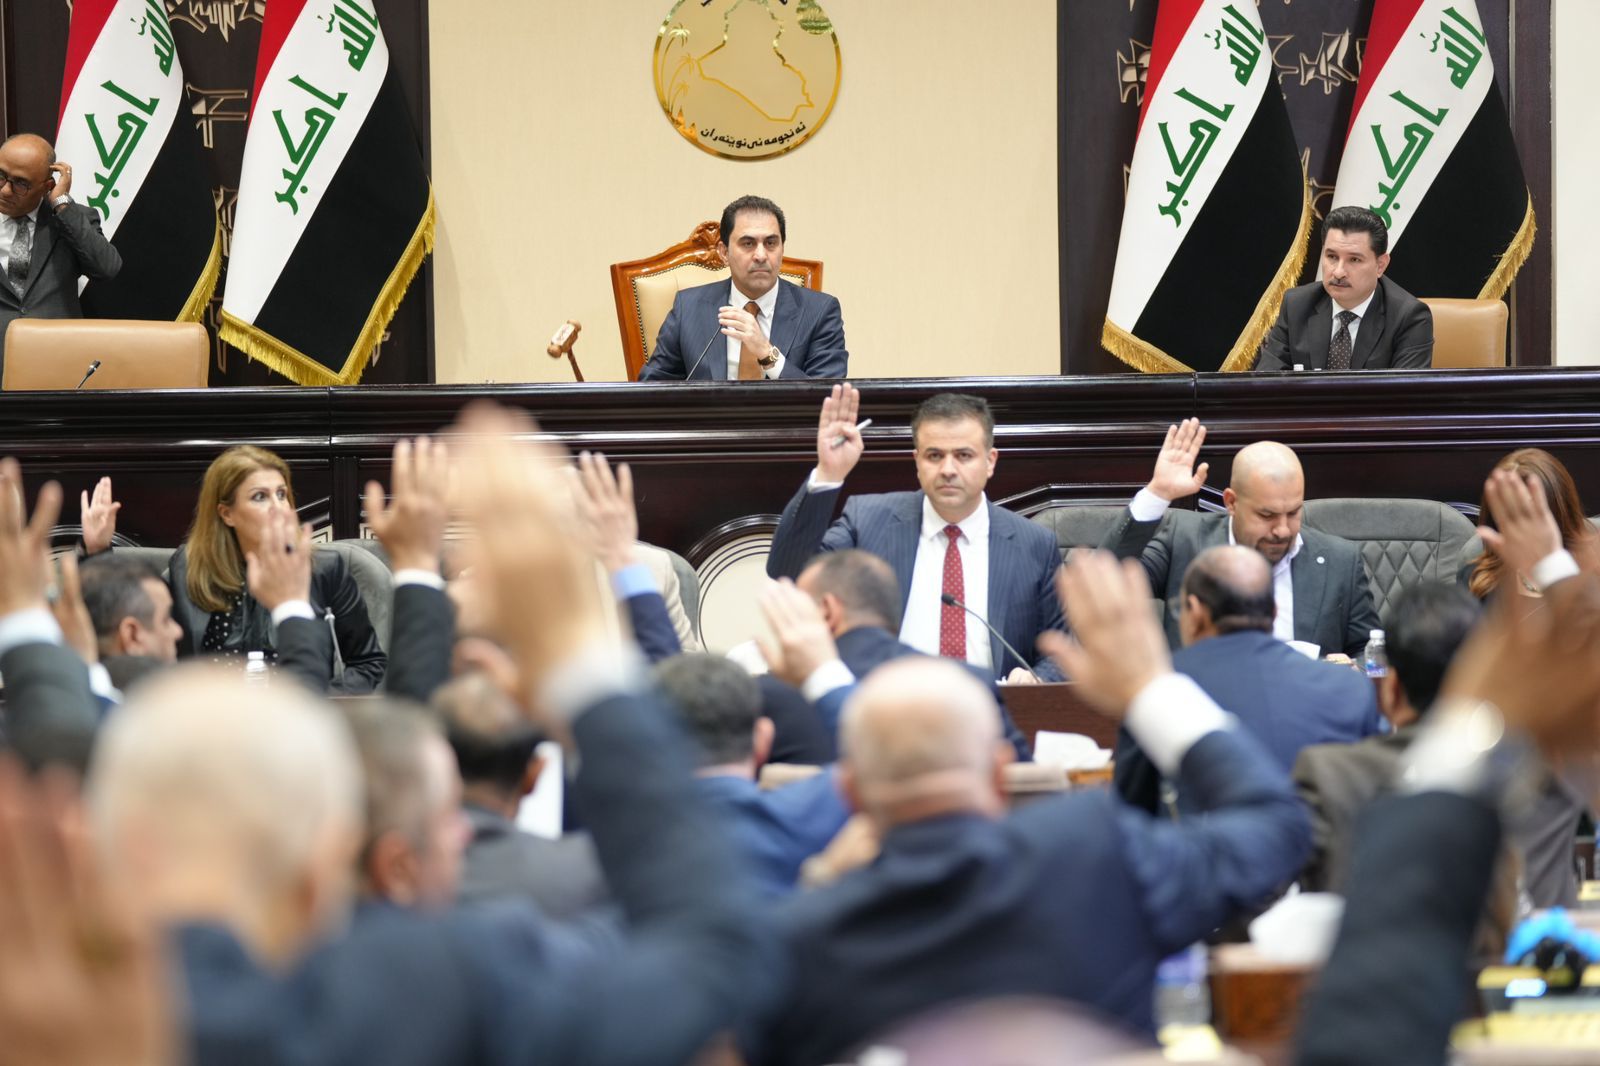 Sunni Parliamentary majority urges new Speaker election clause in next session